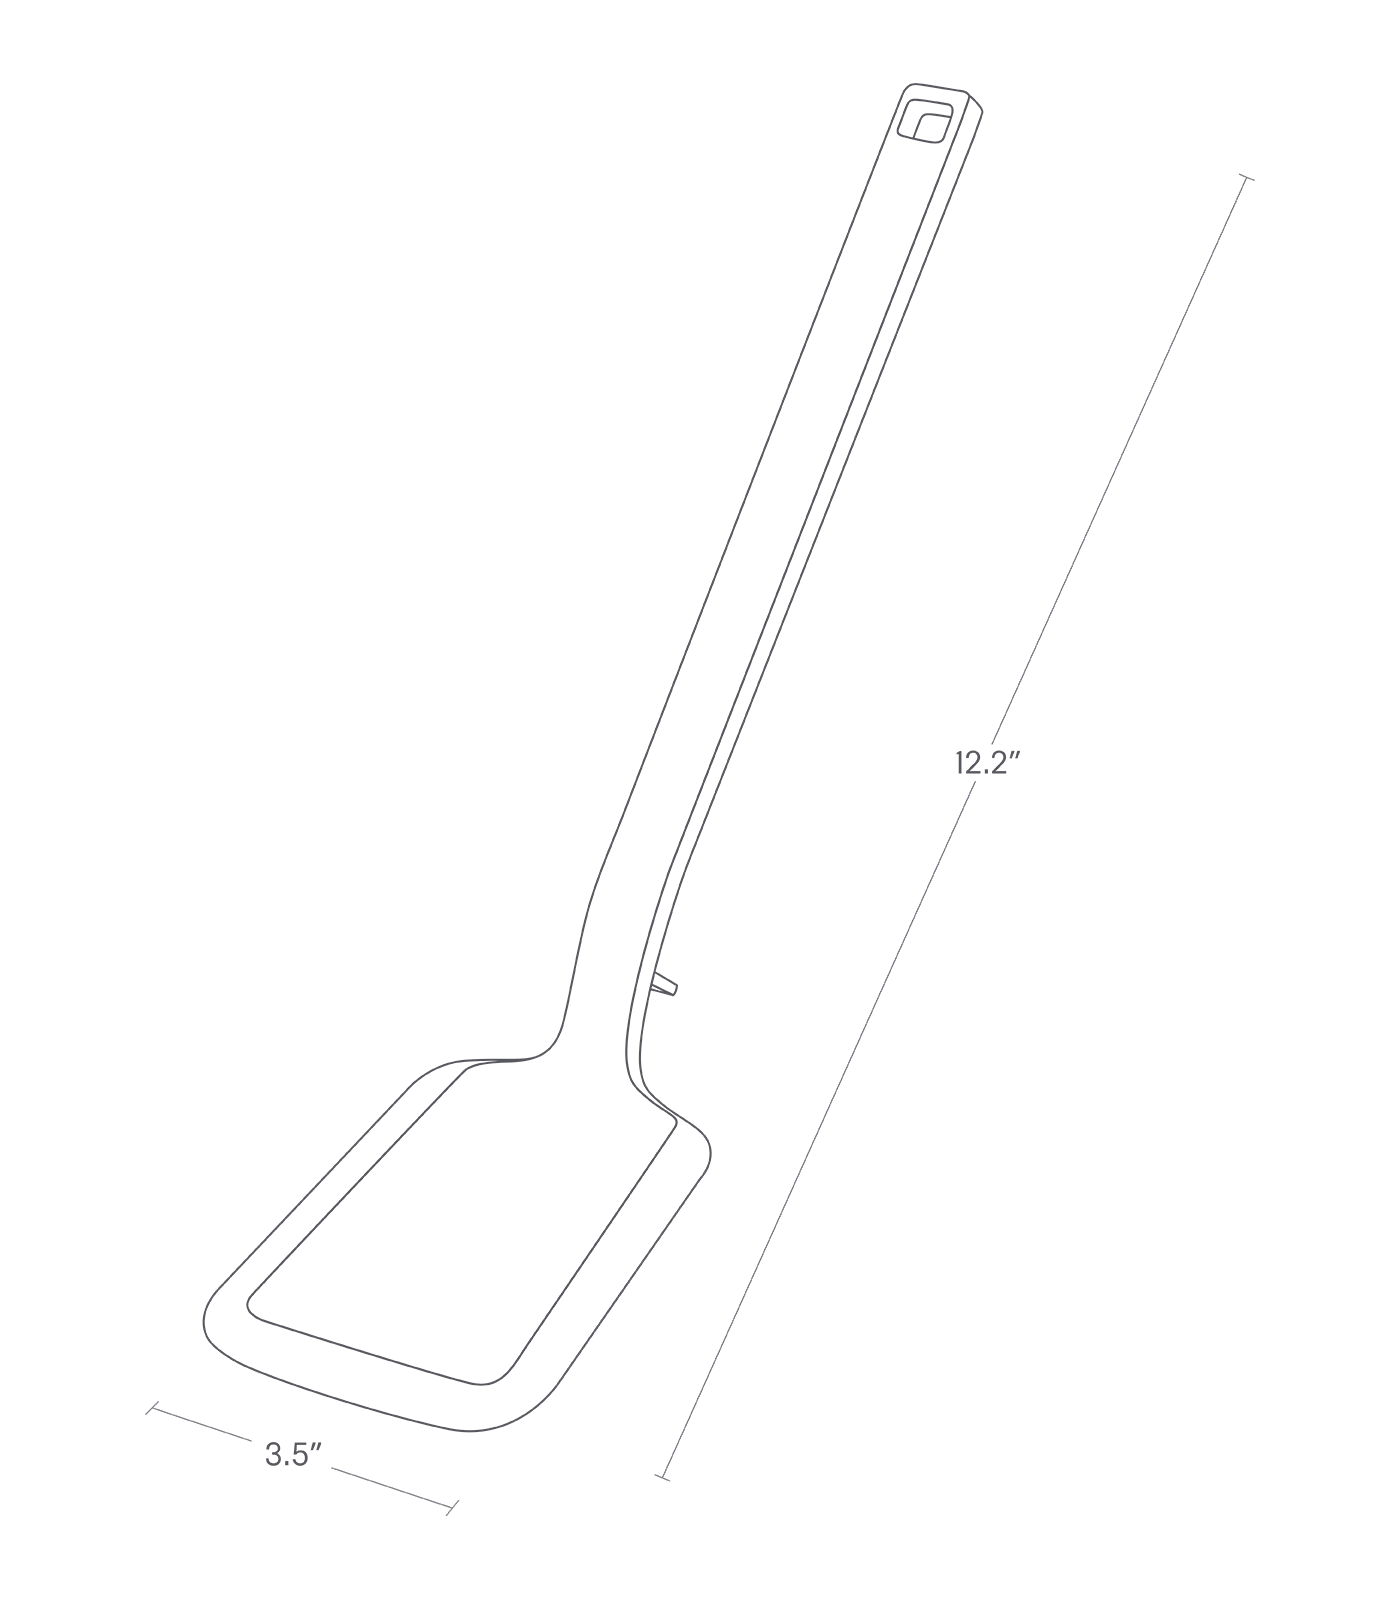 Dimension Image for Floating Utensil on a white background showing height of 12.2